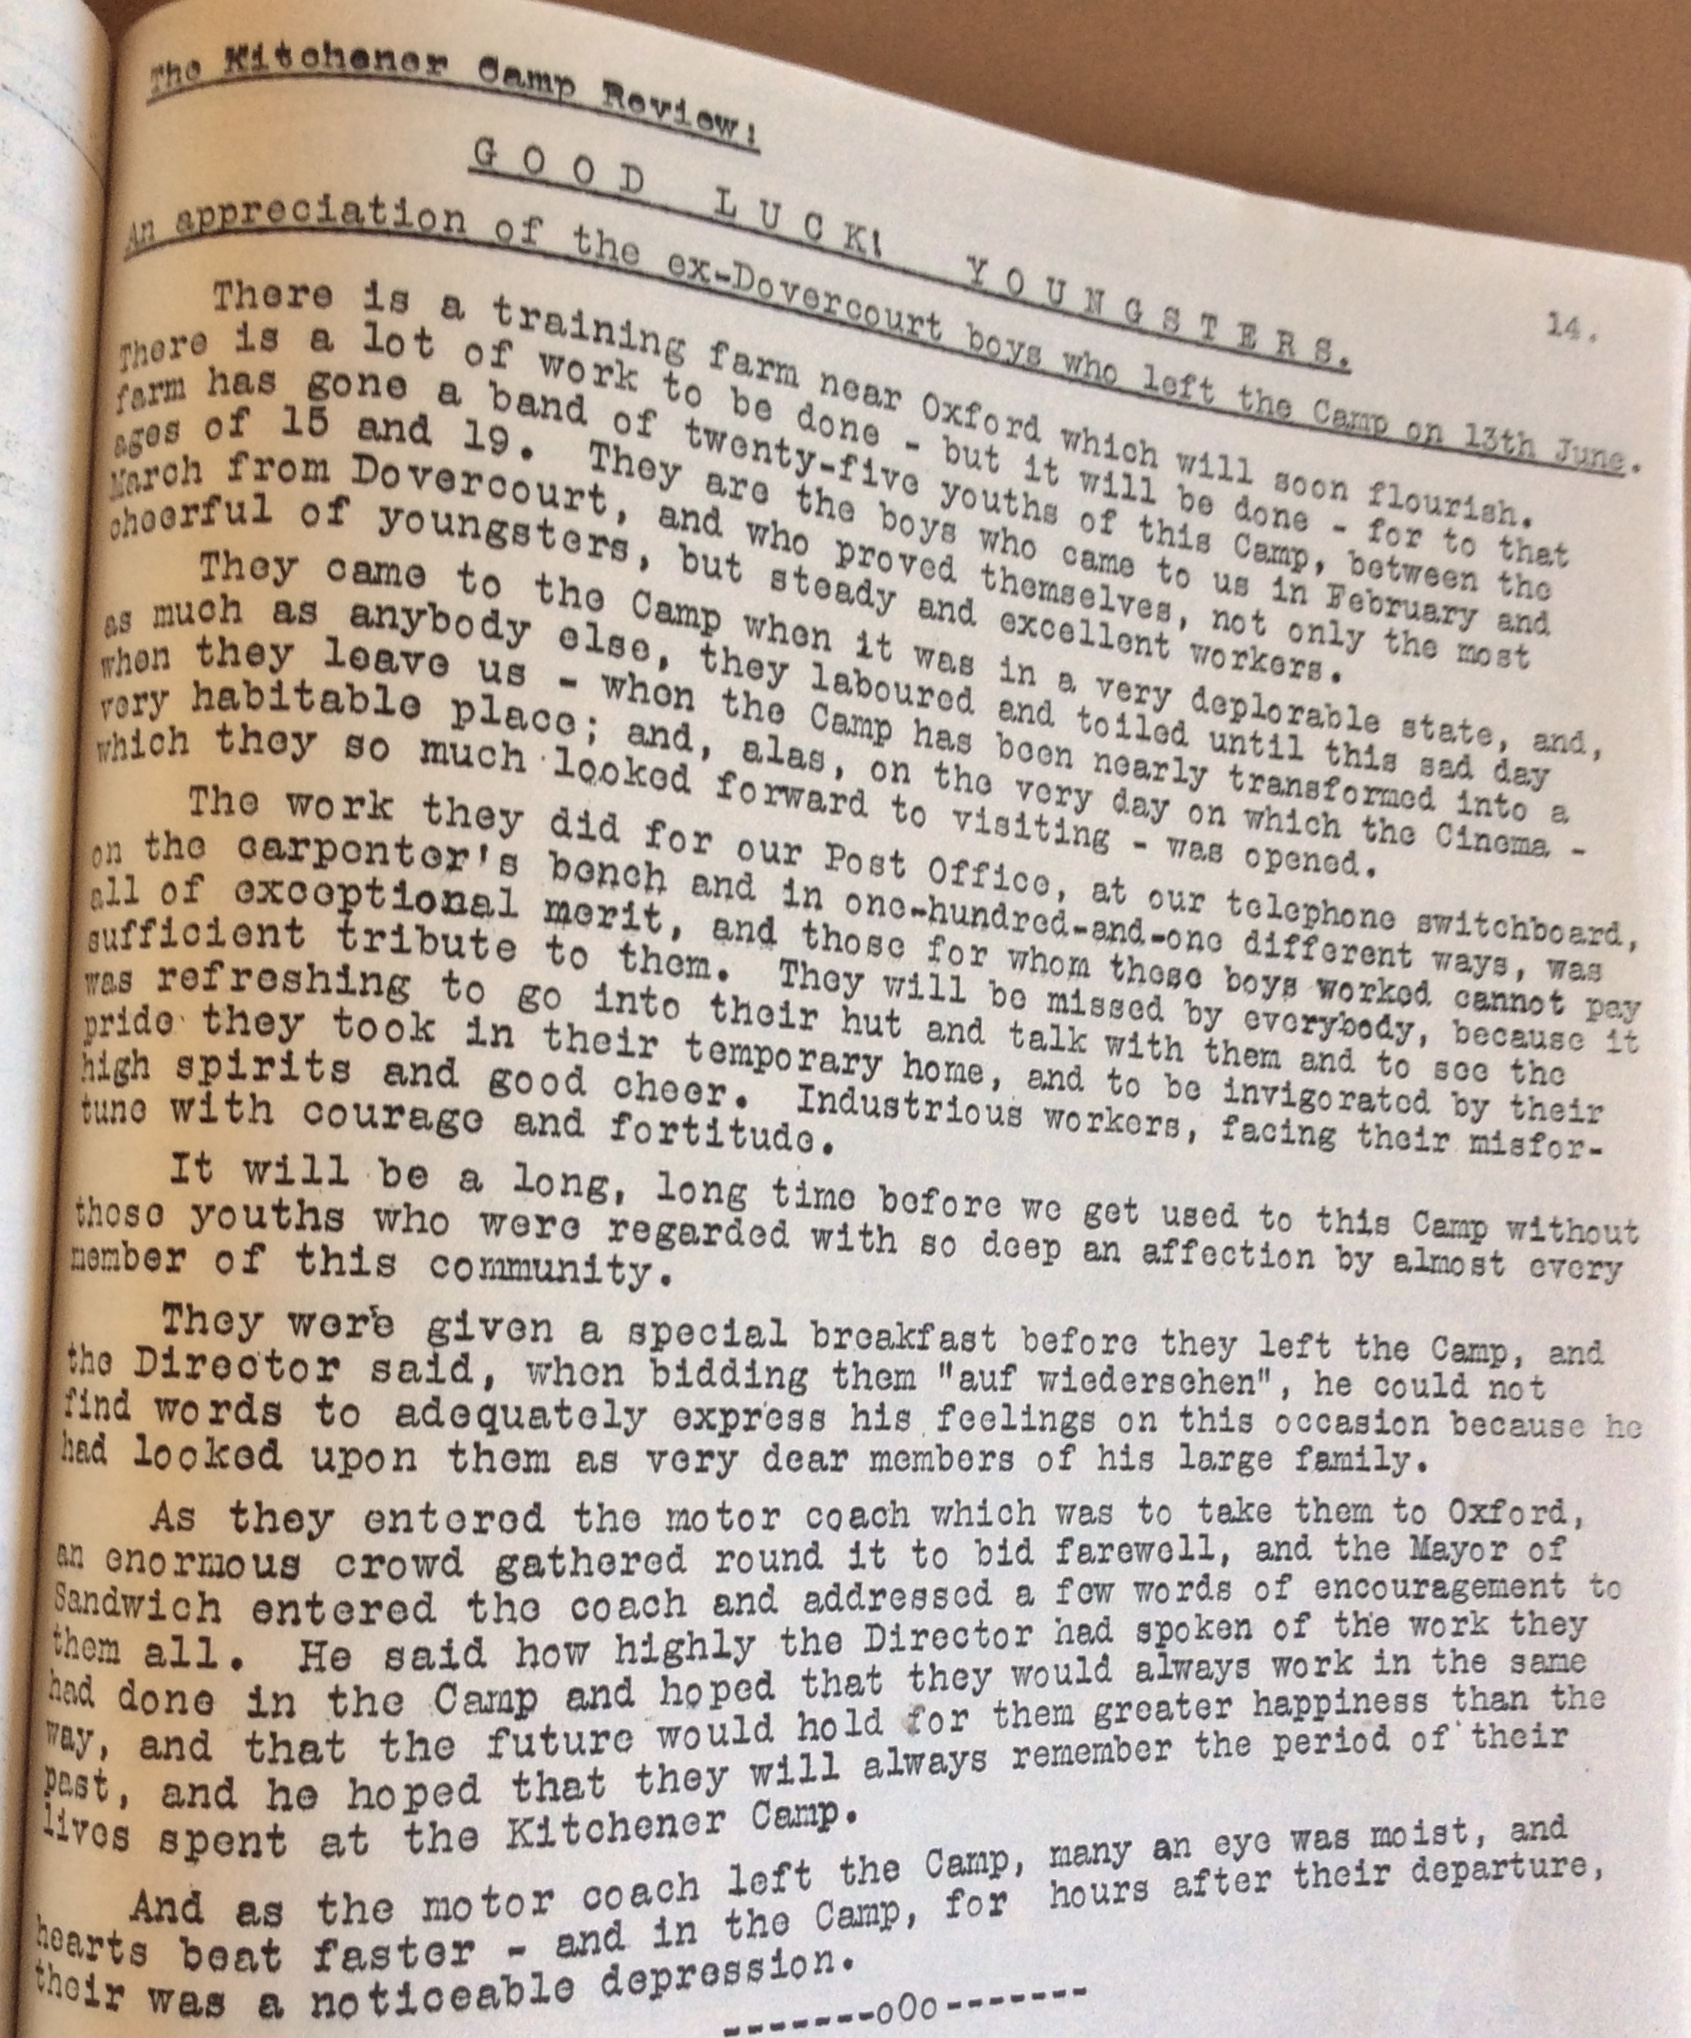 The Kitchener Camp Review, July 1939, No. 5, page 14, top